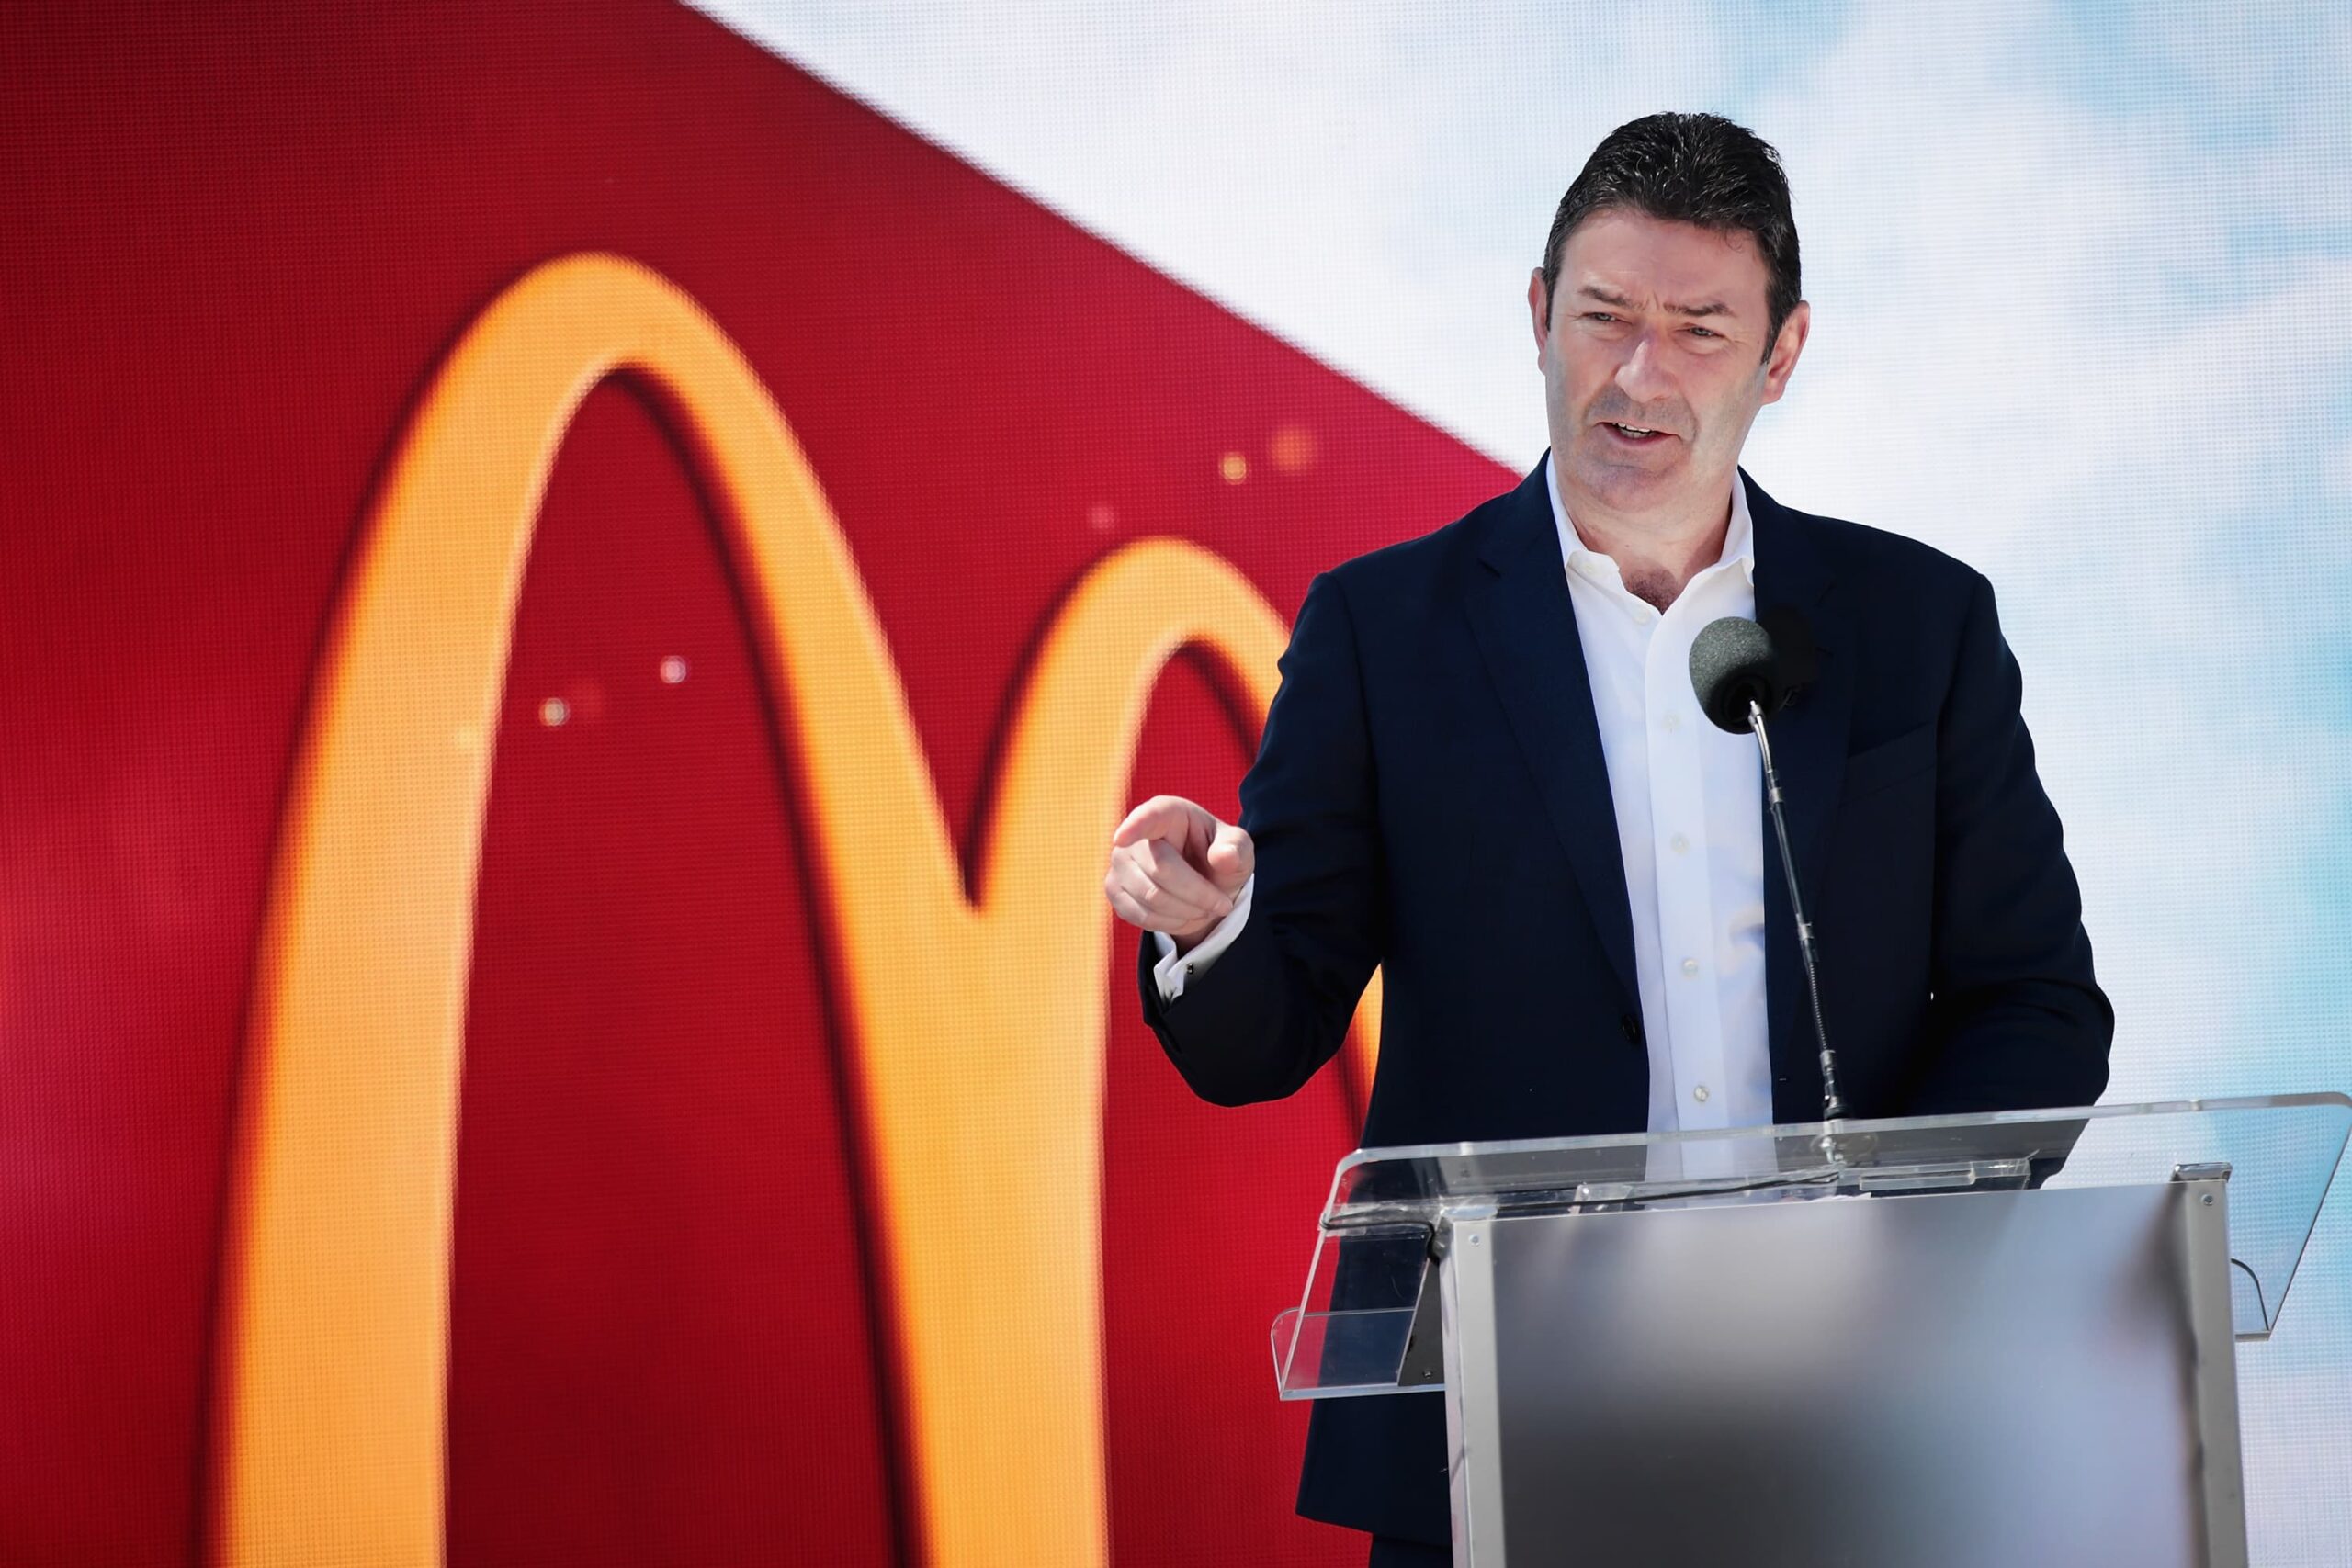 McDonald’s claws back $105 million severance from fired CEO Easterbrook